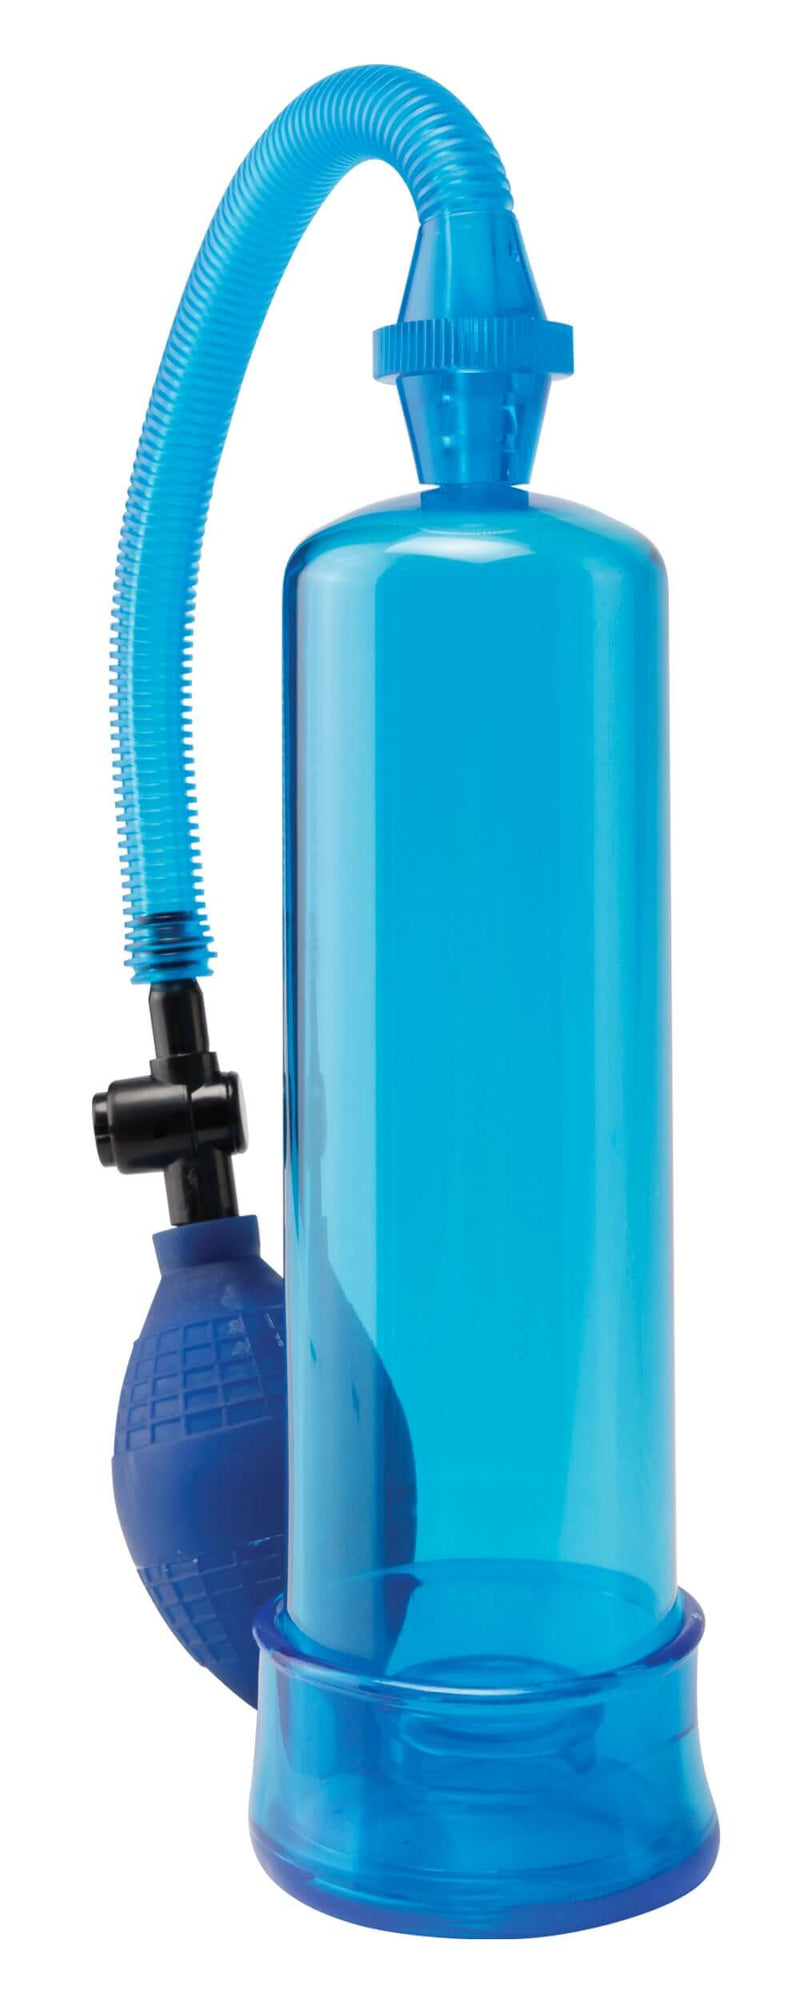 Pipedream Products Pump Worx Beginners Pump Blue at $21.99